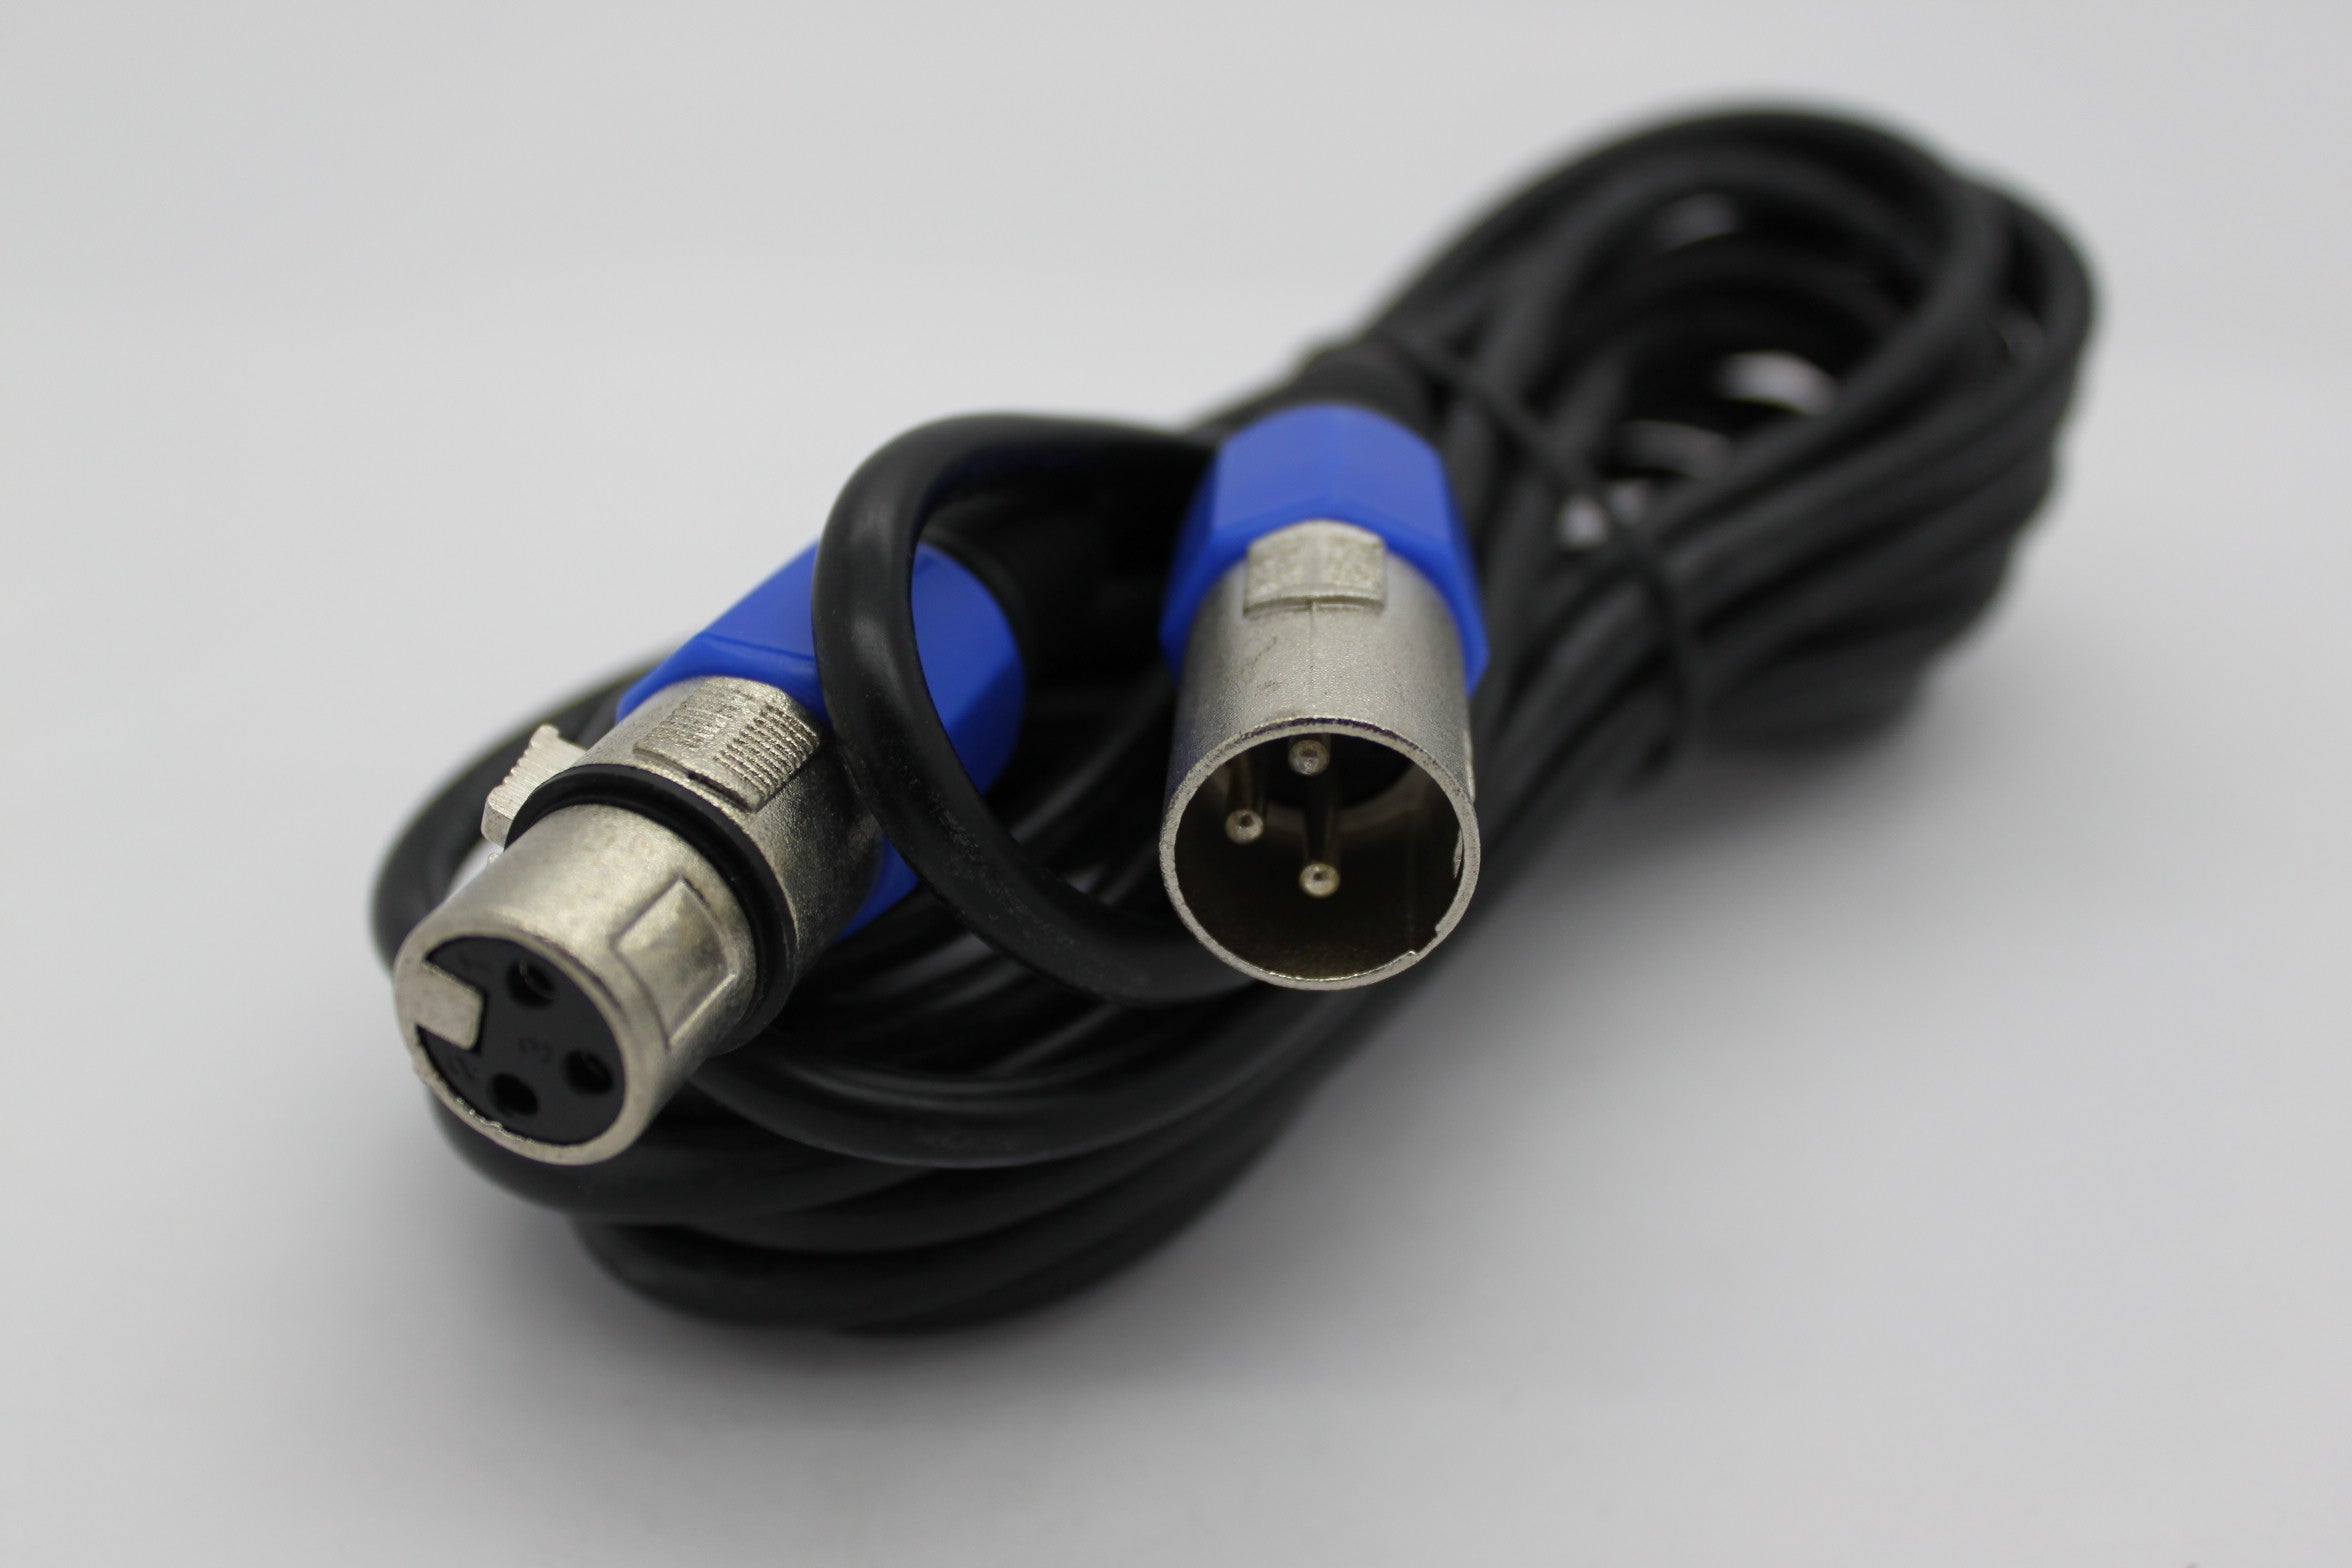 XLR Male to XLR Female Cable (5 Meter) Cyberdyne Audio Cables